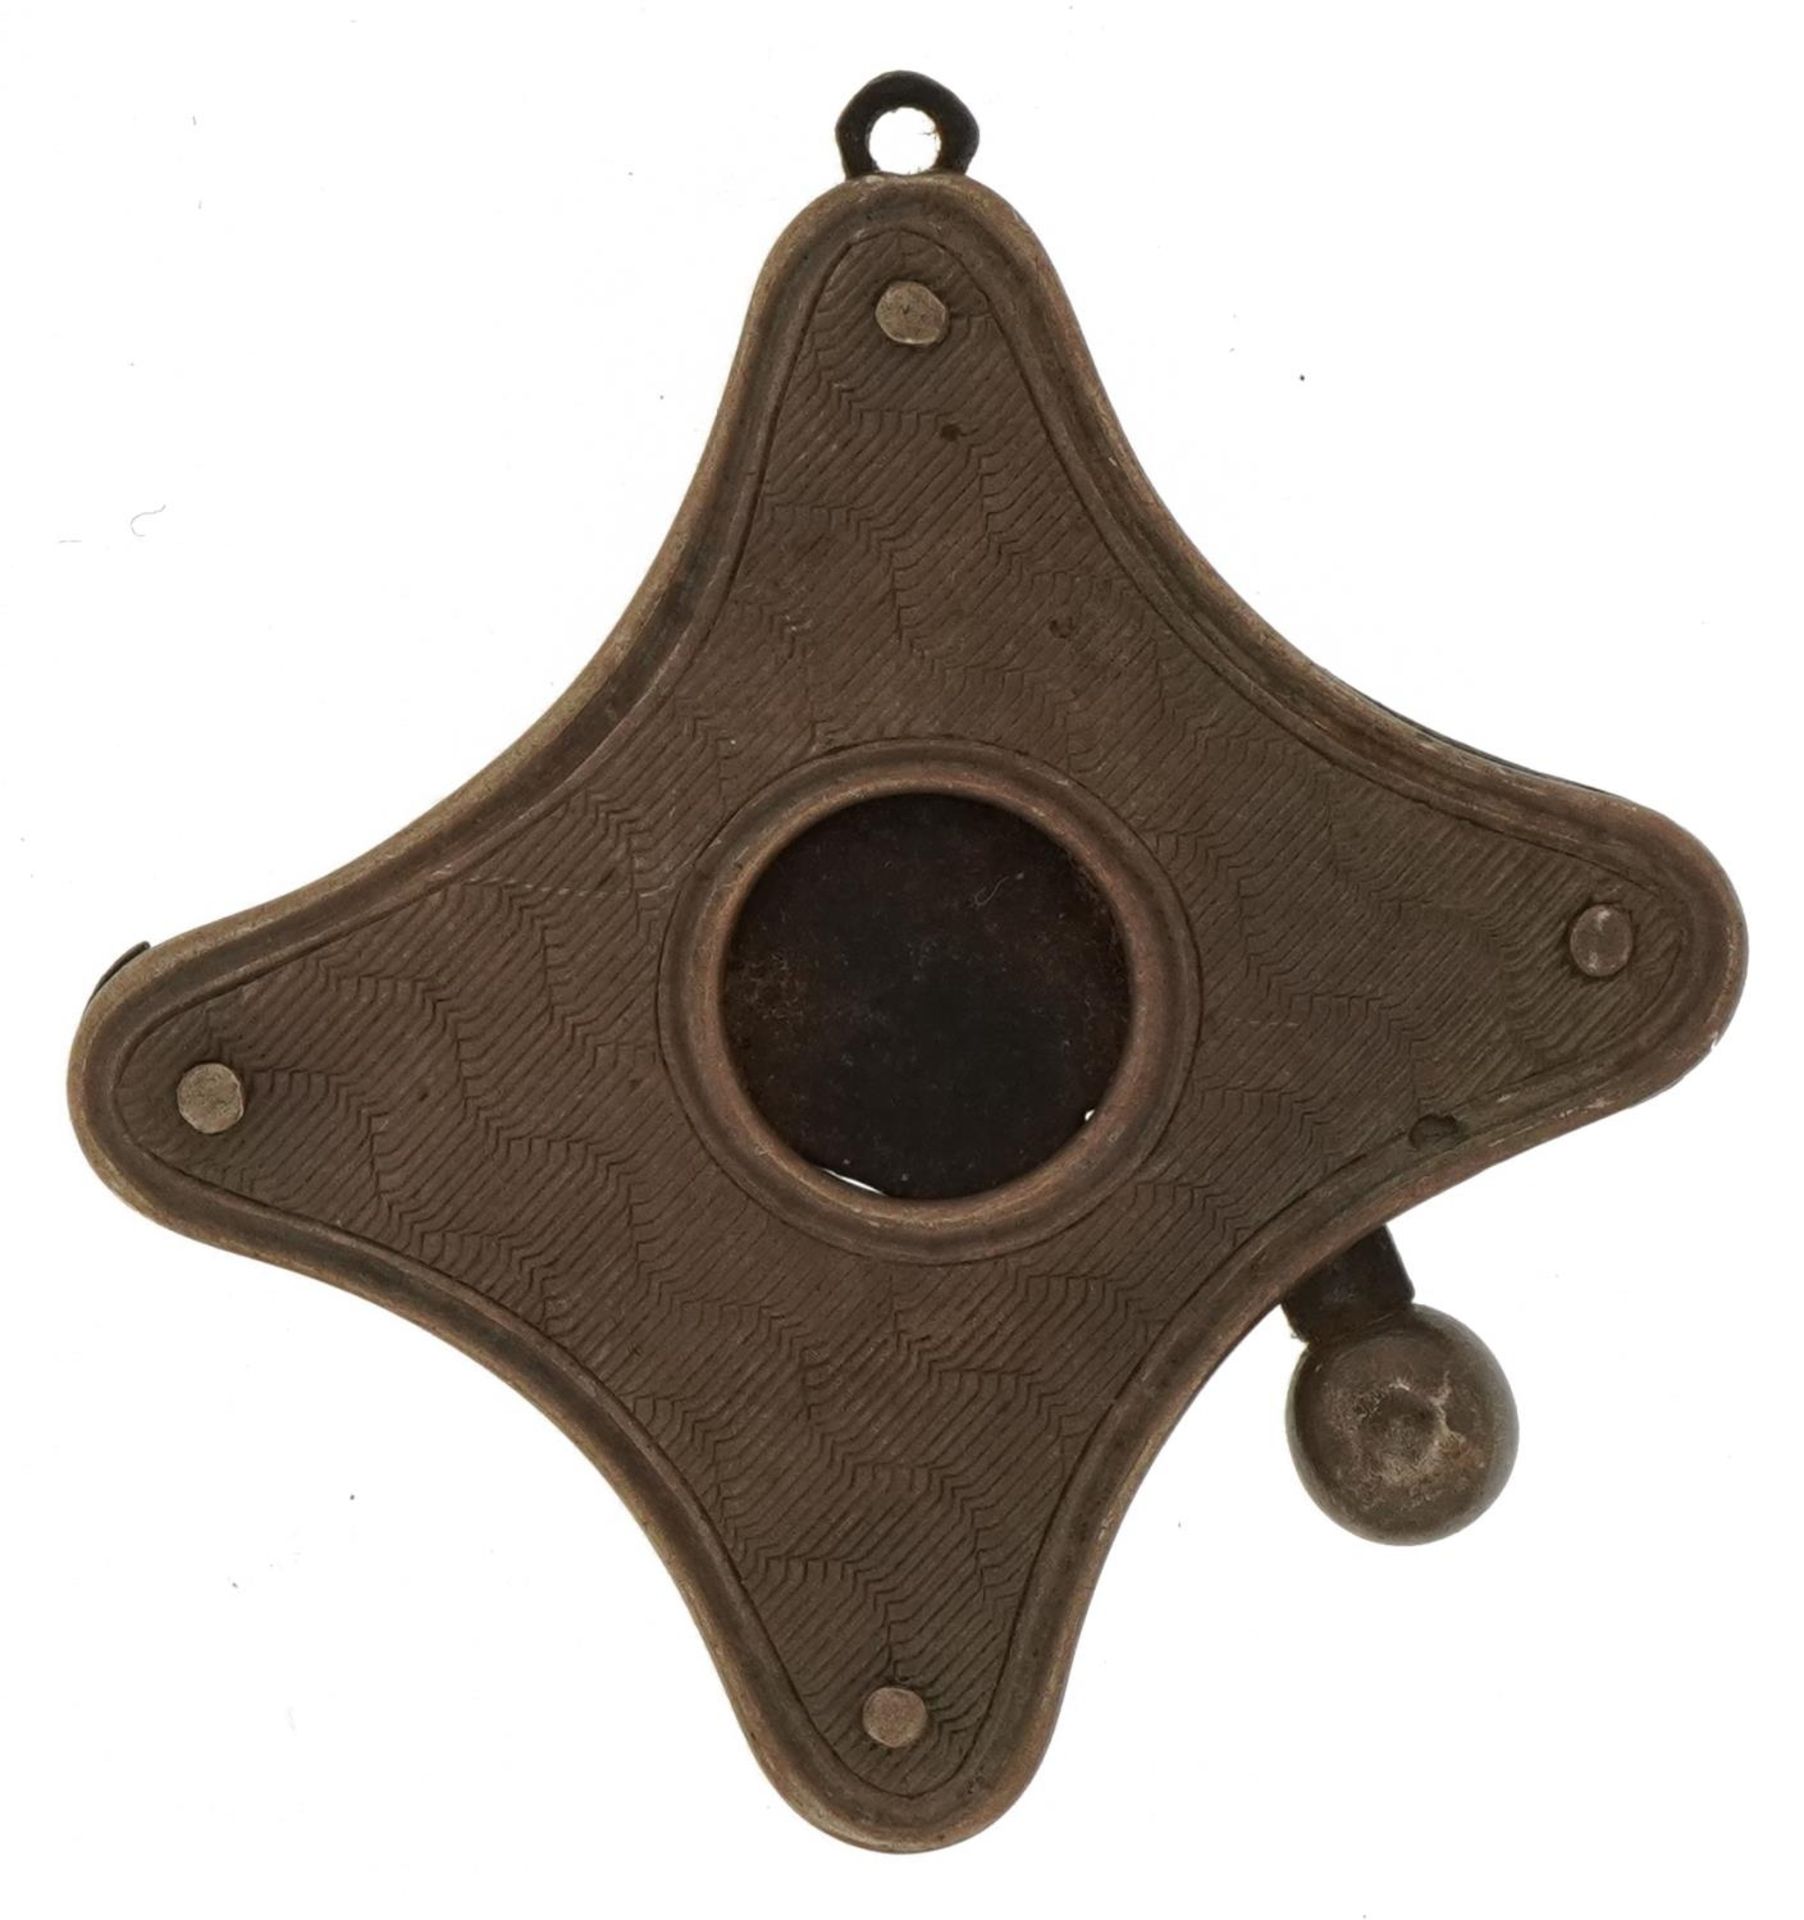 Unmarked silver engine turned cigar cutter, 2.7cm wide, 9.8g - Image 3 of 3